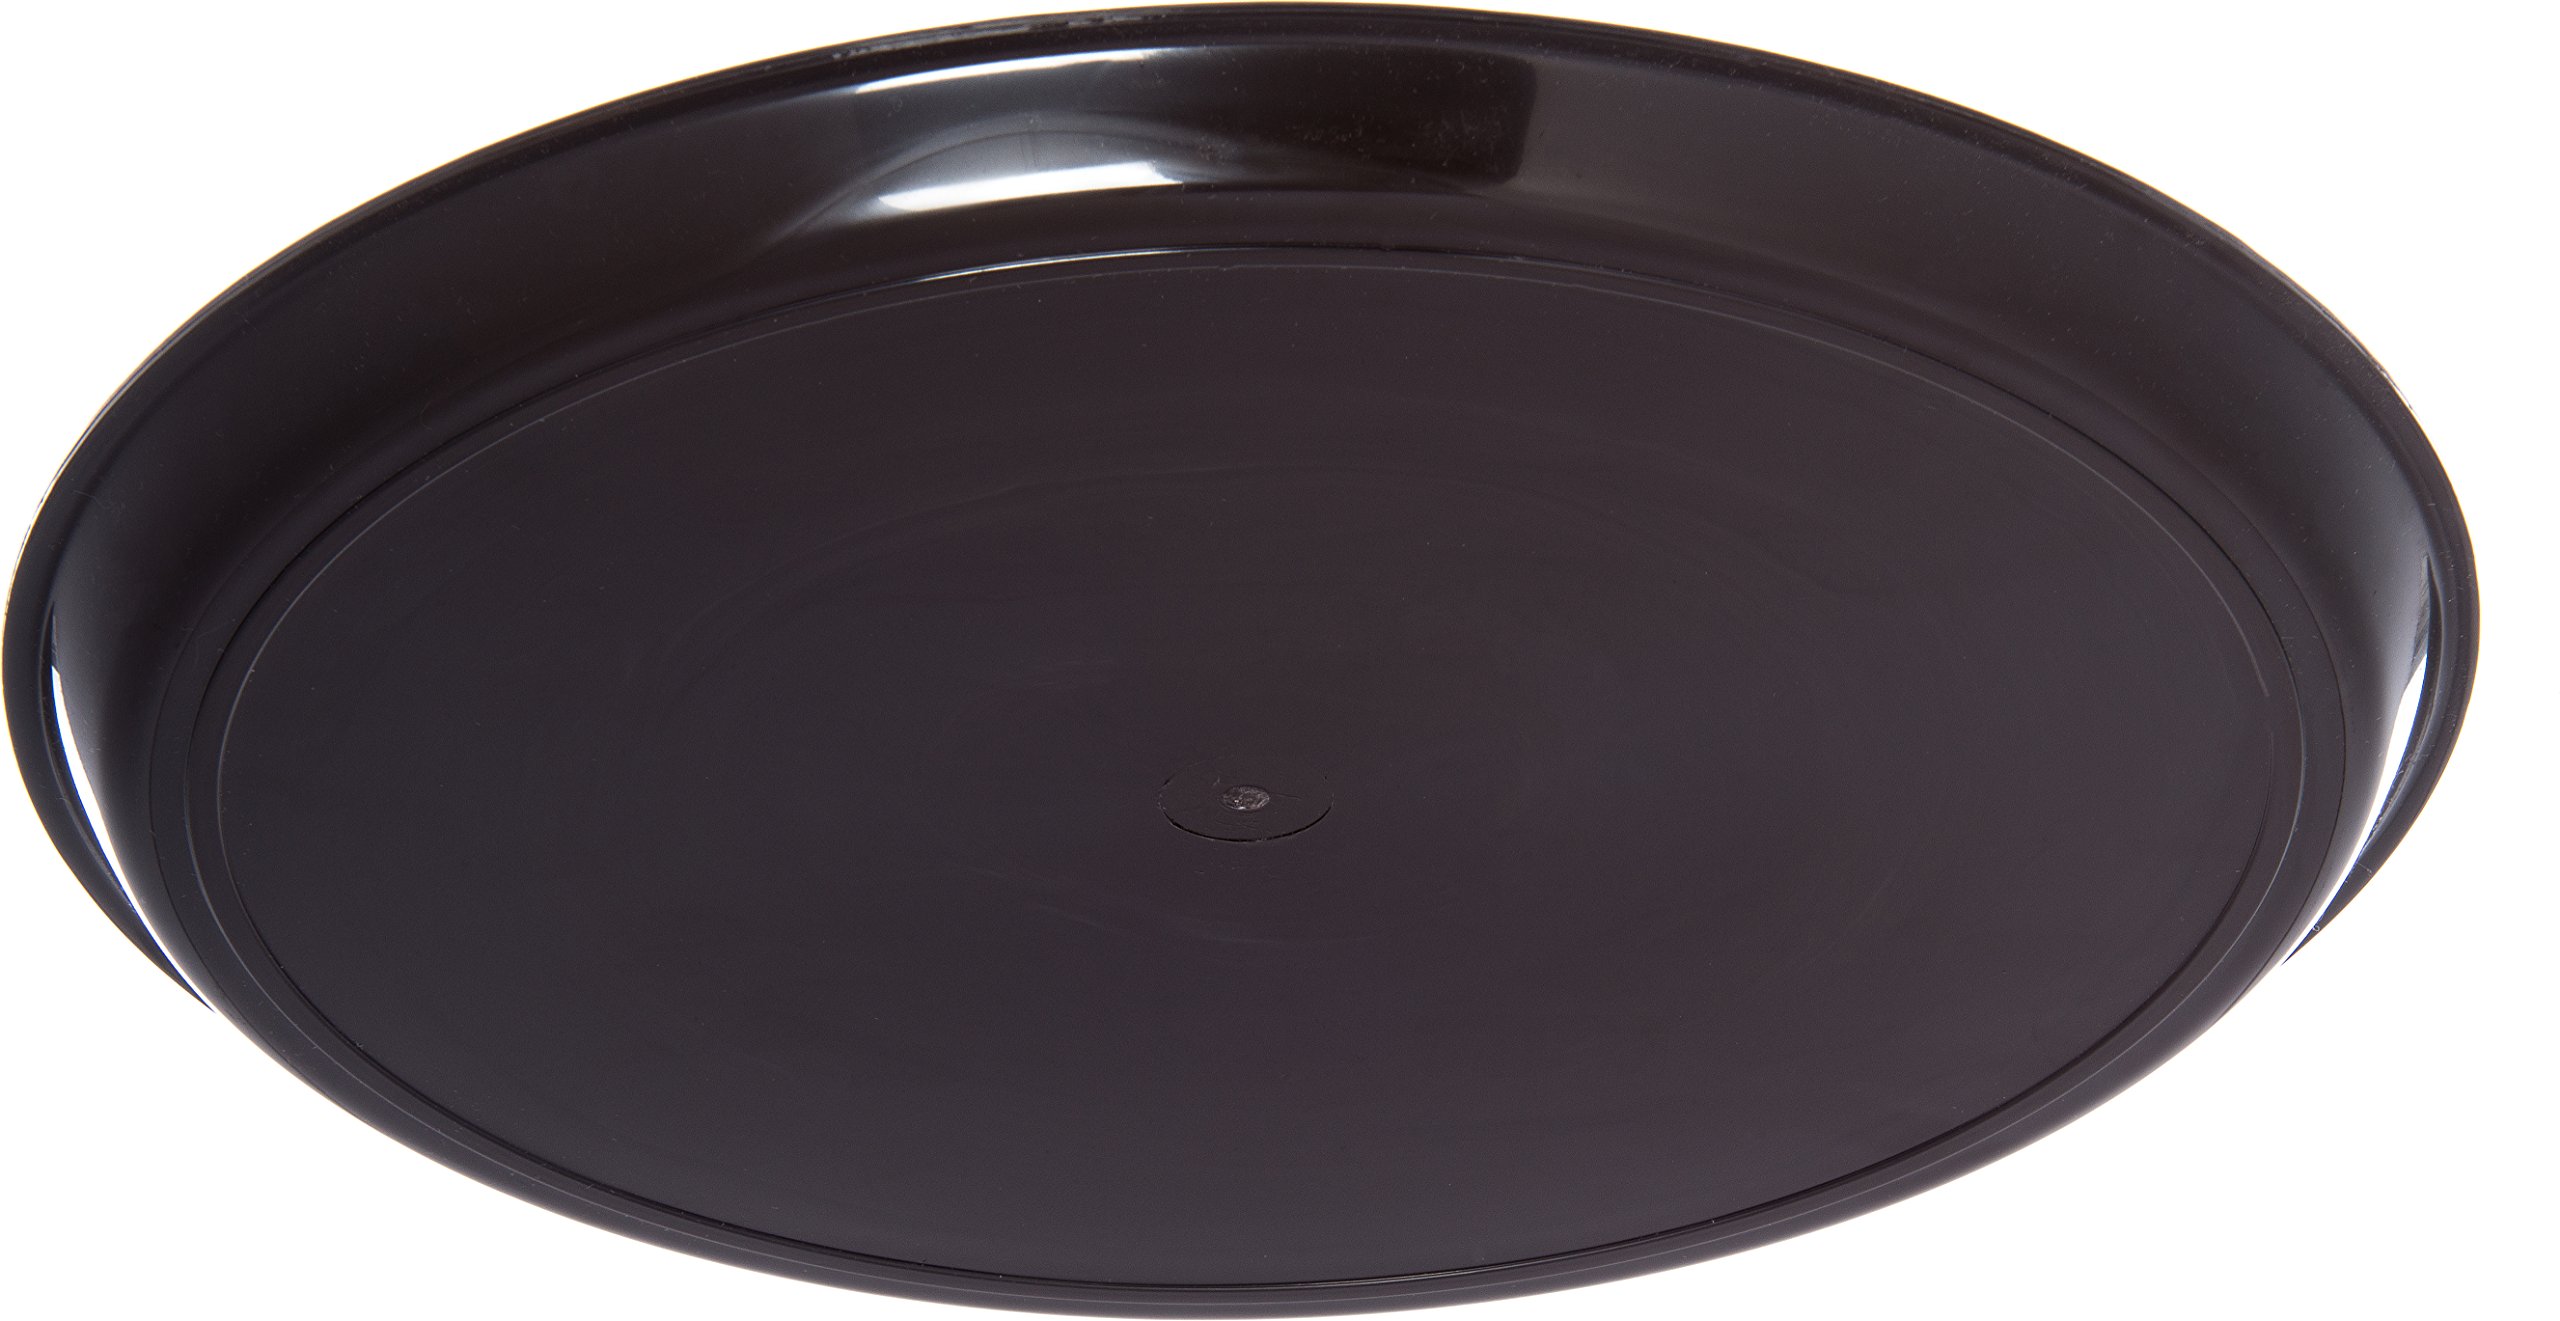 Carlisle FoodService Products Cork Tray Round Tray for Restaurants, Cork, 14 Inches, Brown, (Pack of 12)